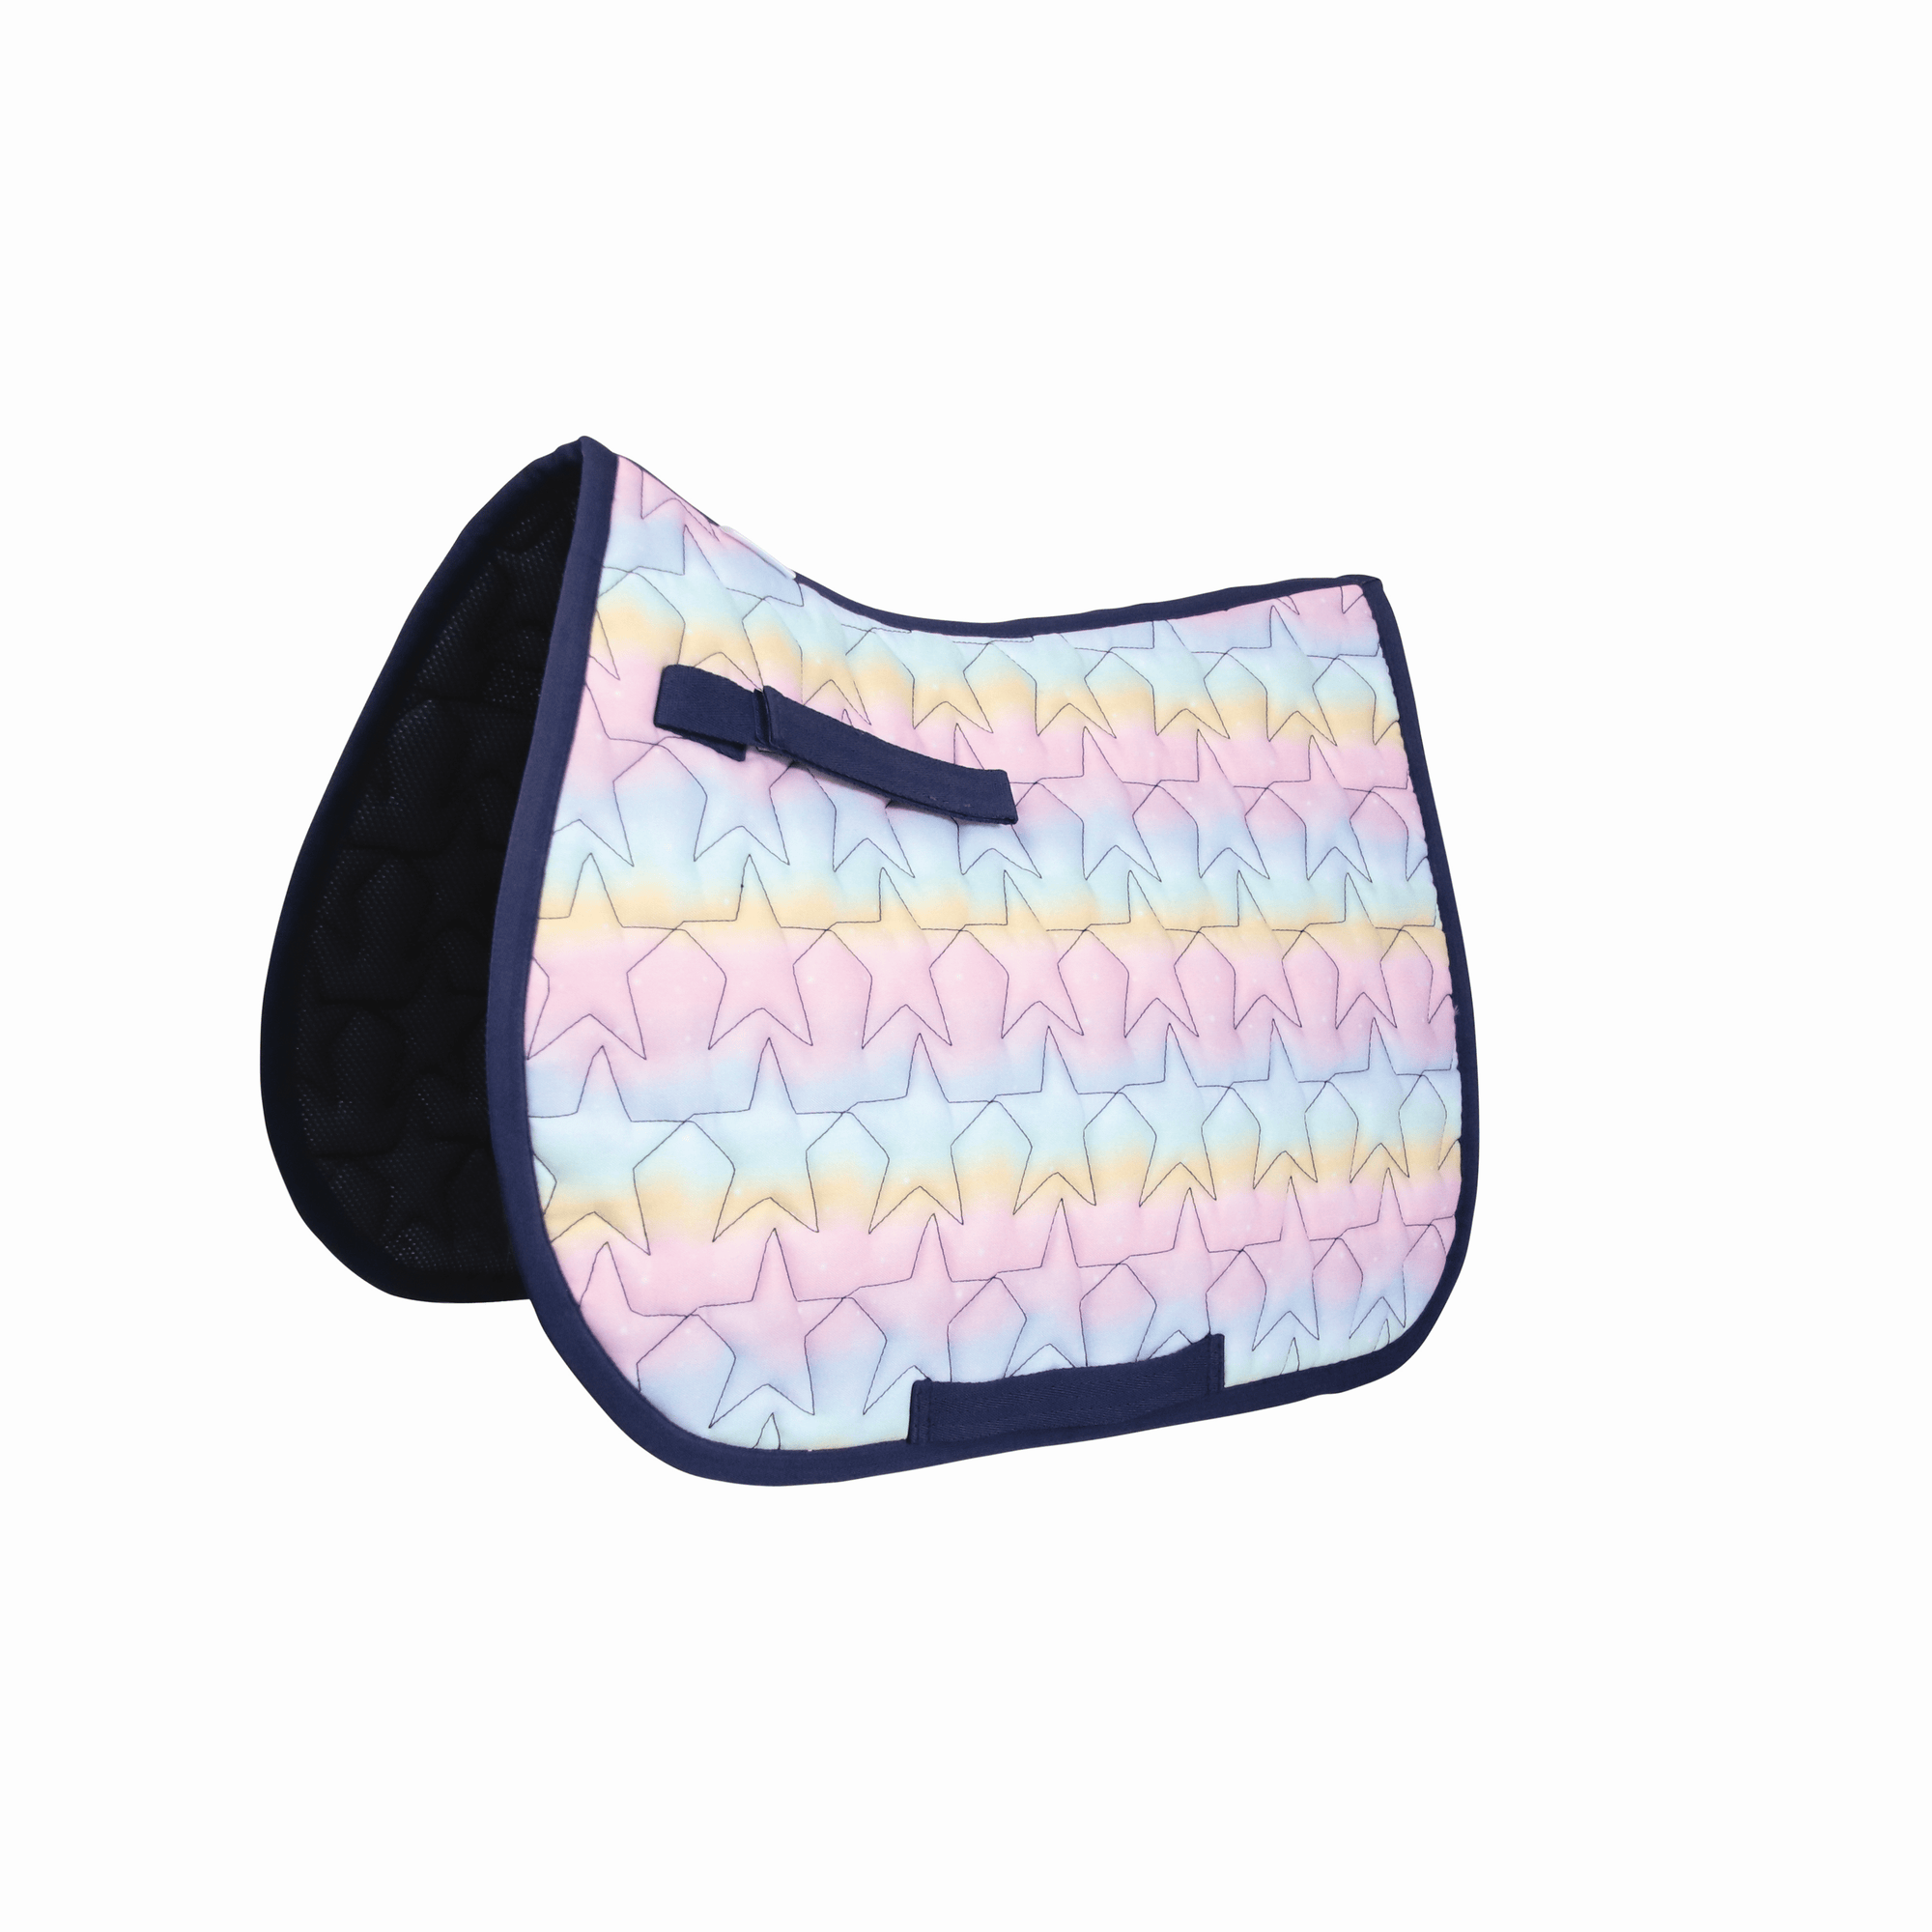 Dazzling dream saddle pad by little rider